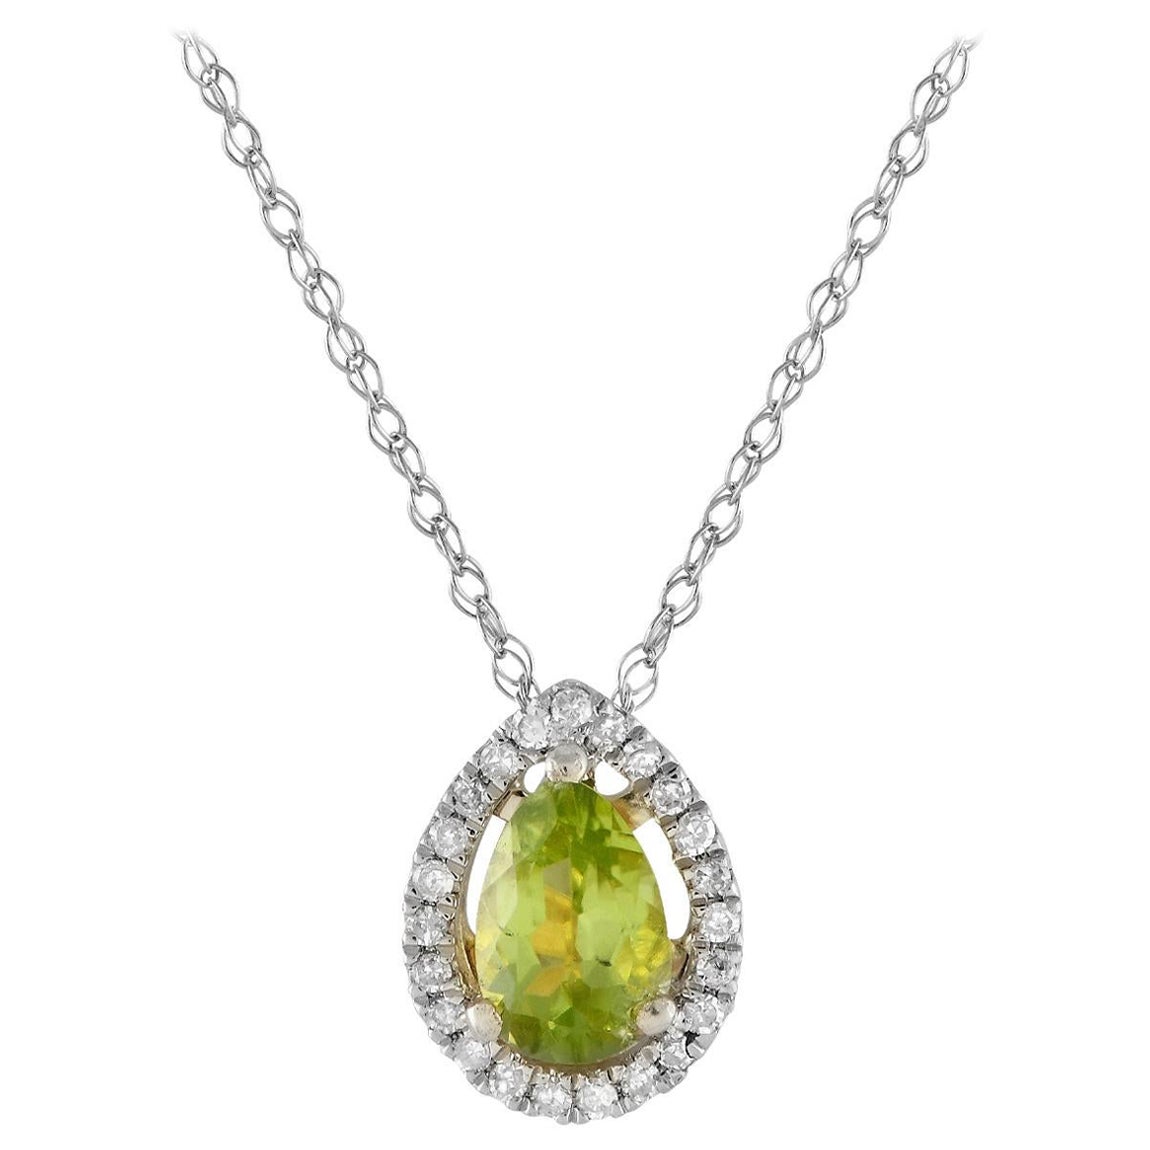 LB Exclusive 14K White Gold 0.07ct Diamond & Peridot Pear Necklace PD4-15556WPE For Sale